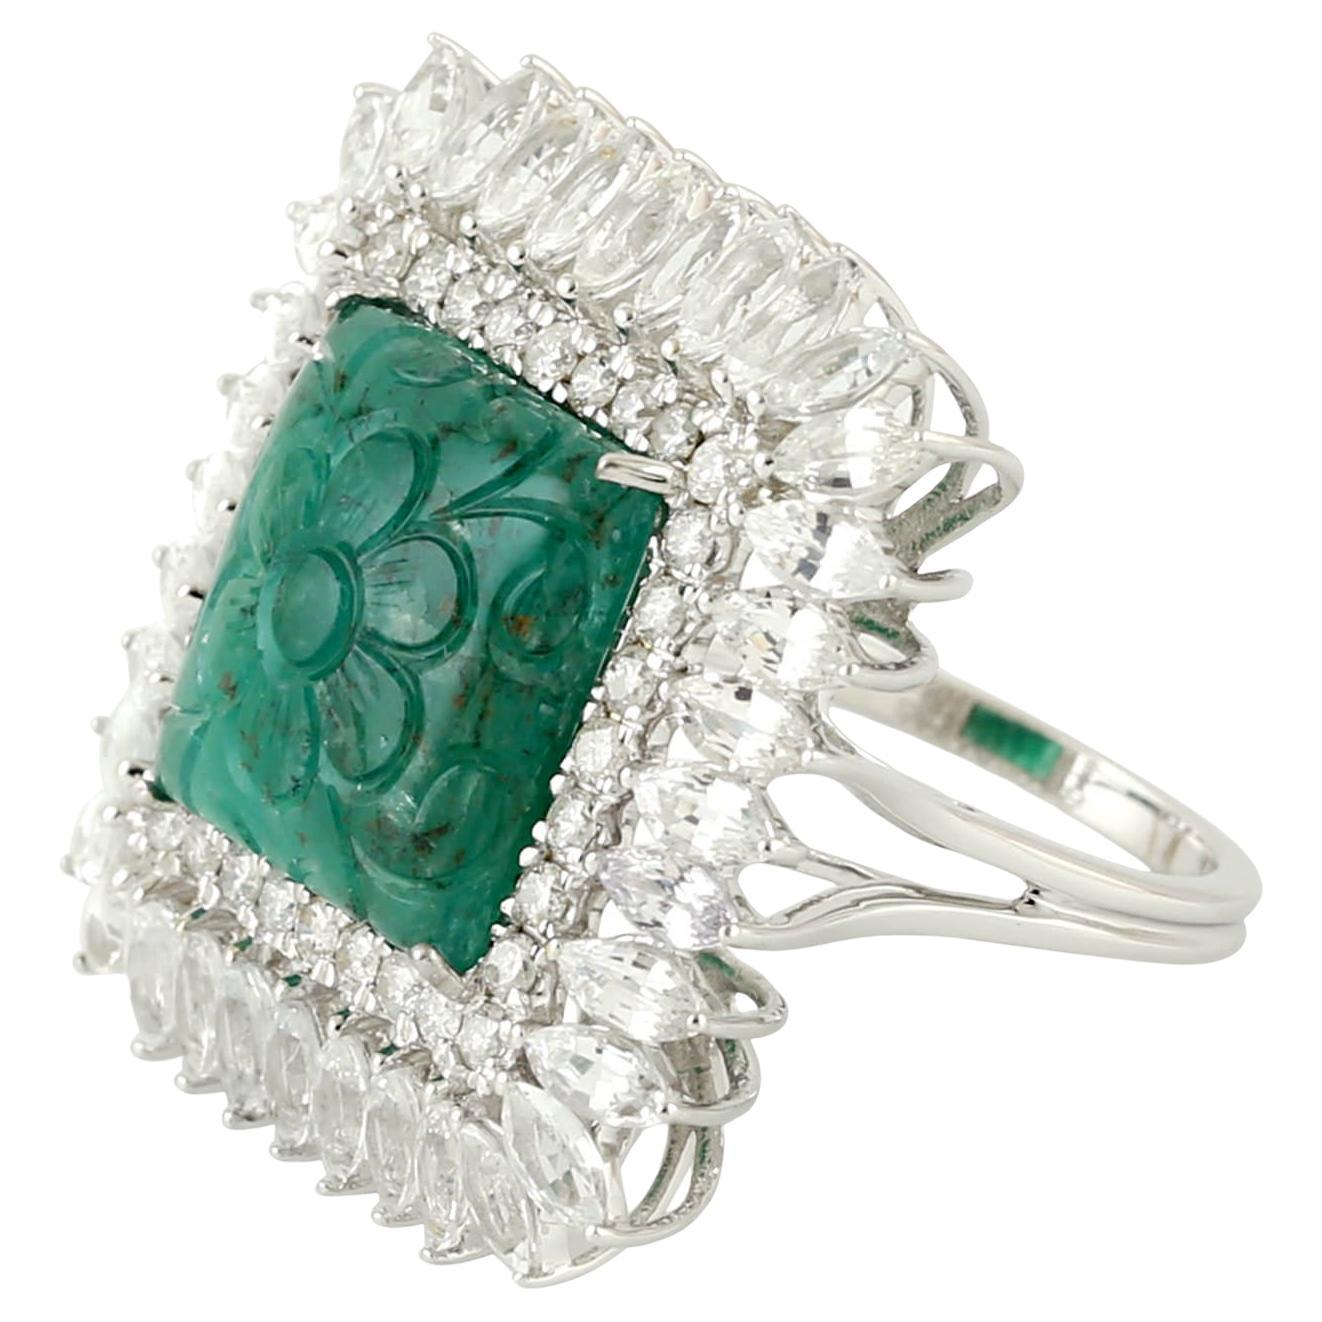 7.21 ct Carved Emerald Cocktail Ring With White Sapphire & Diamonds In 18k Gold